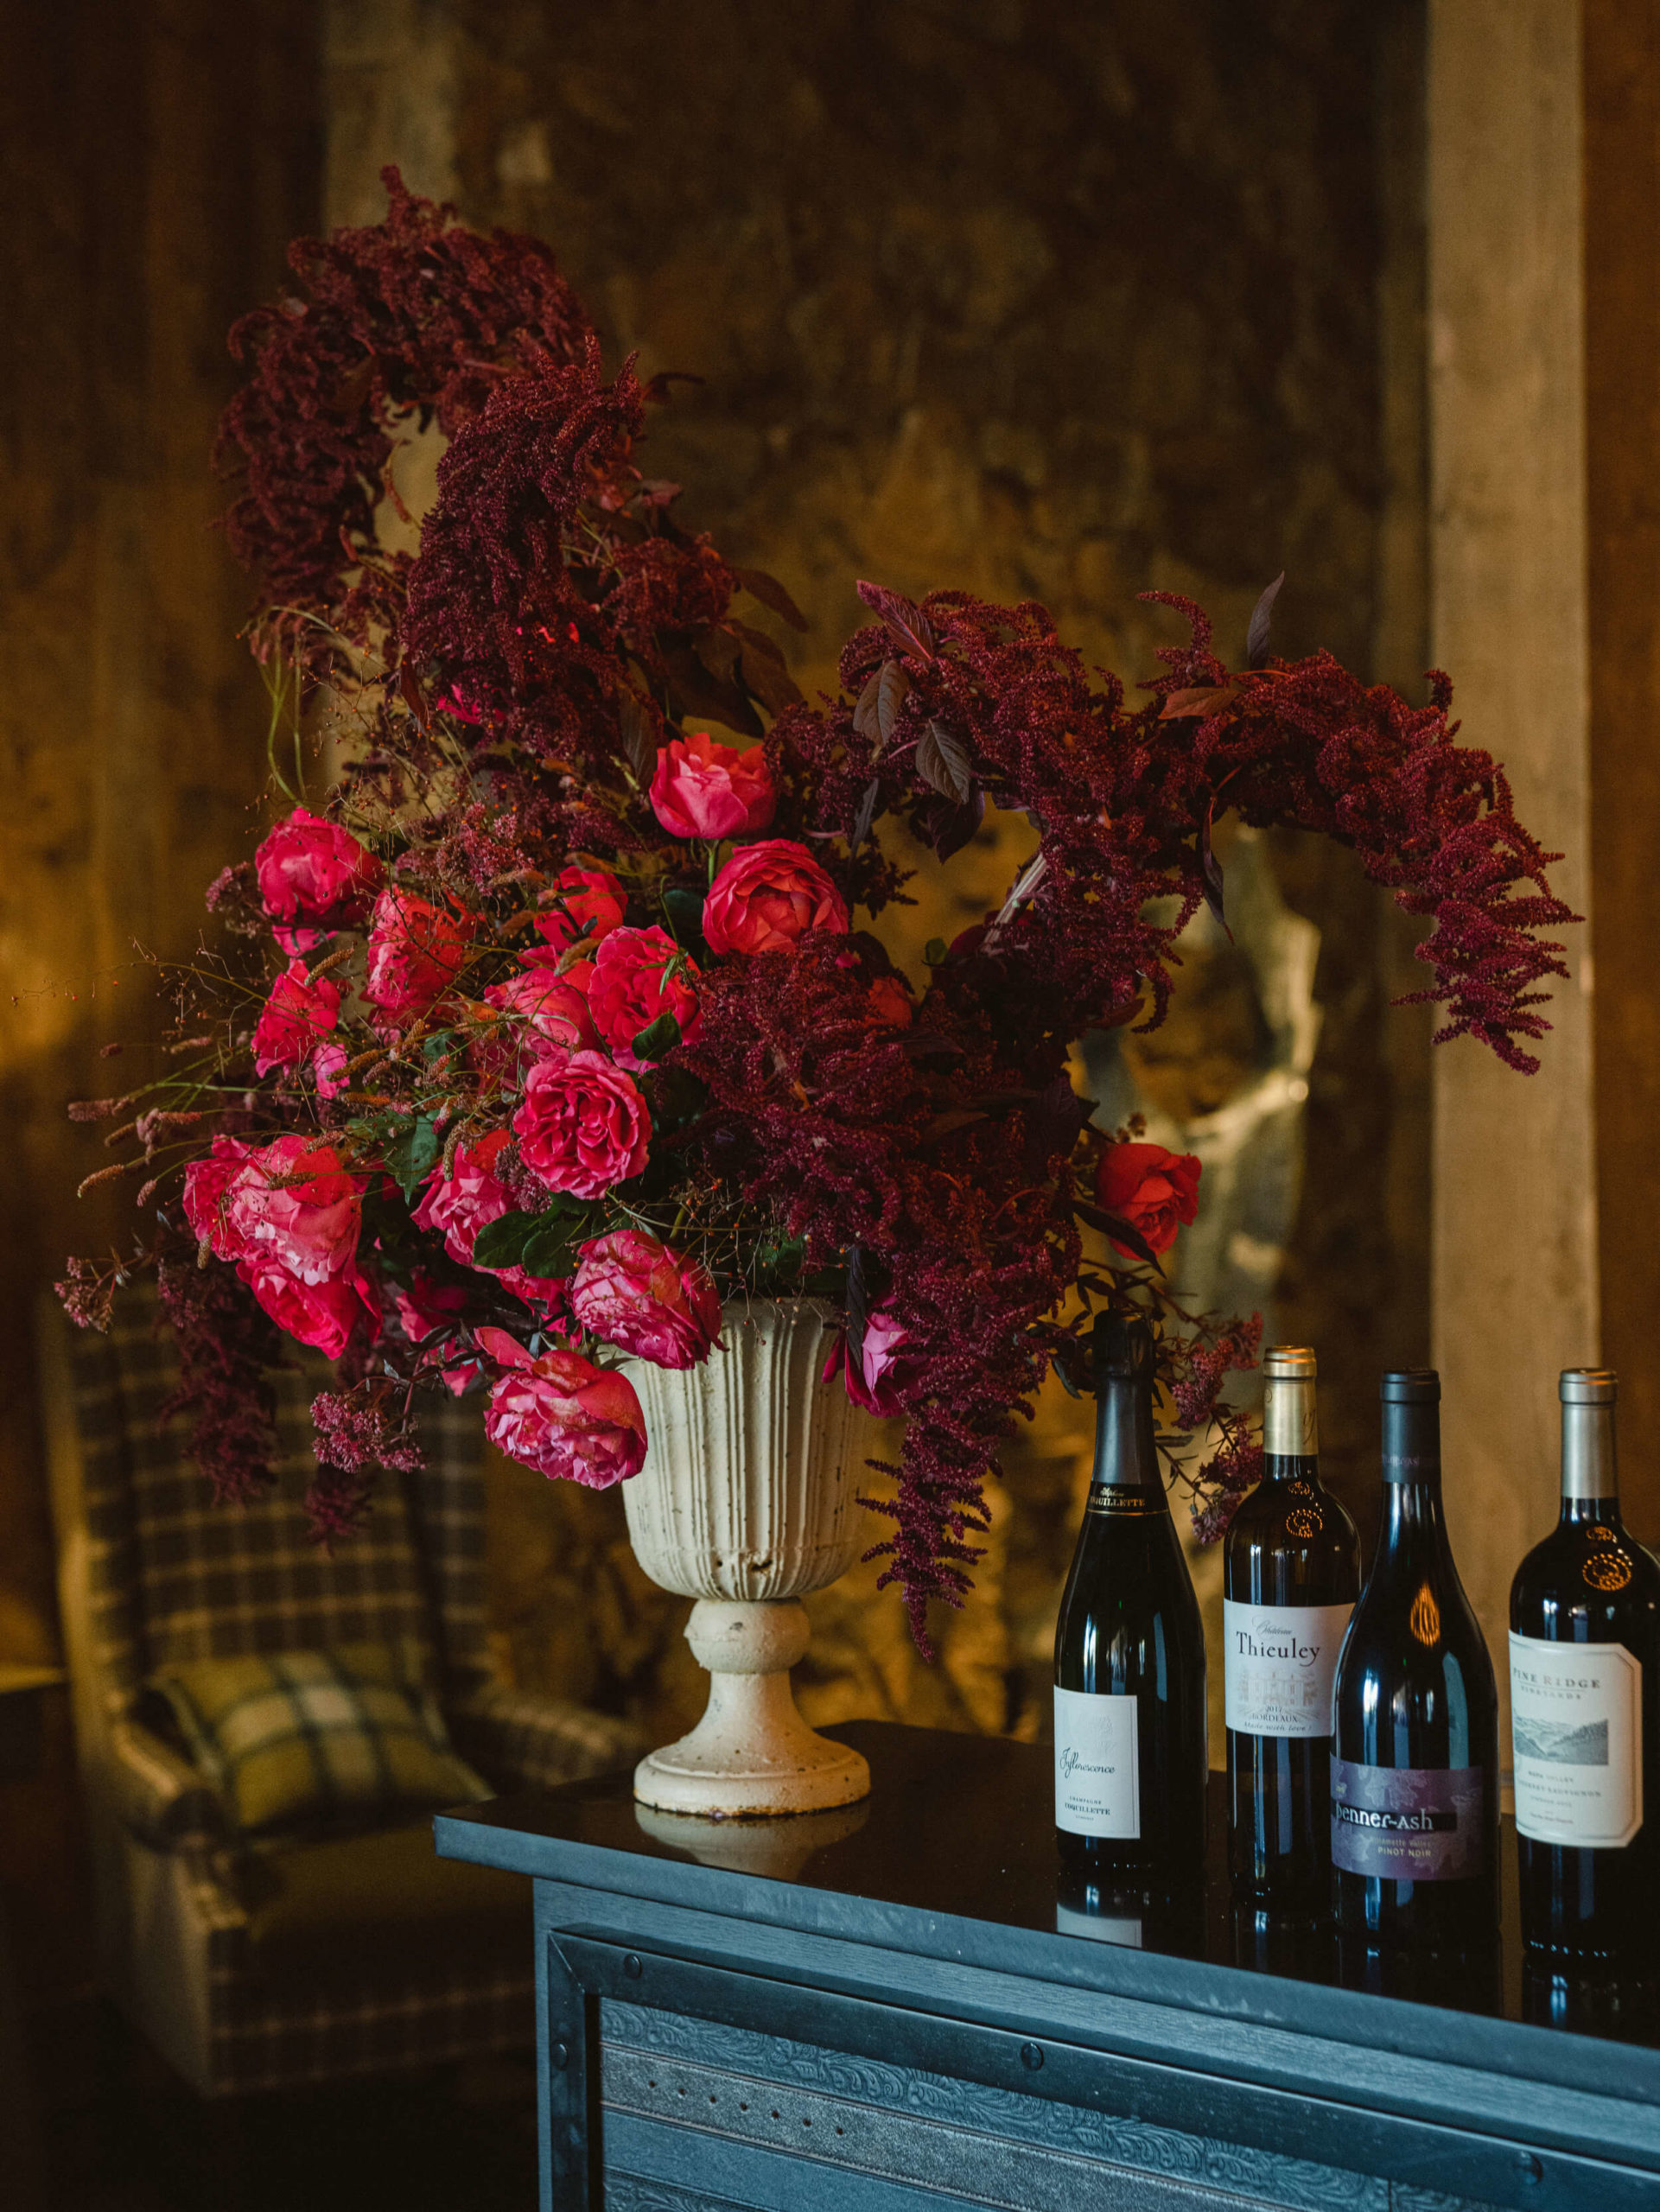 Flowers in a vase and wine